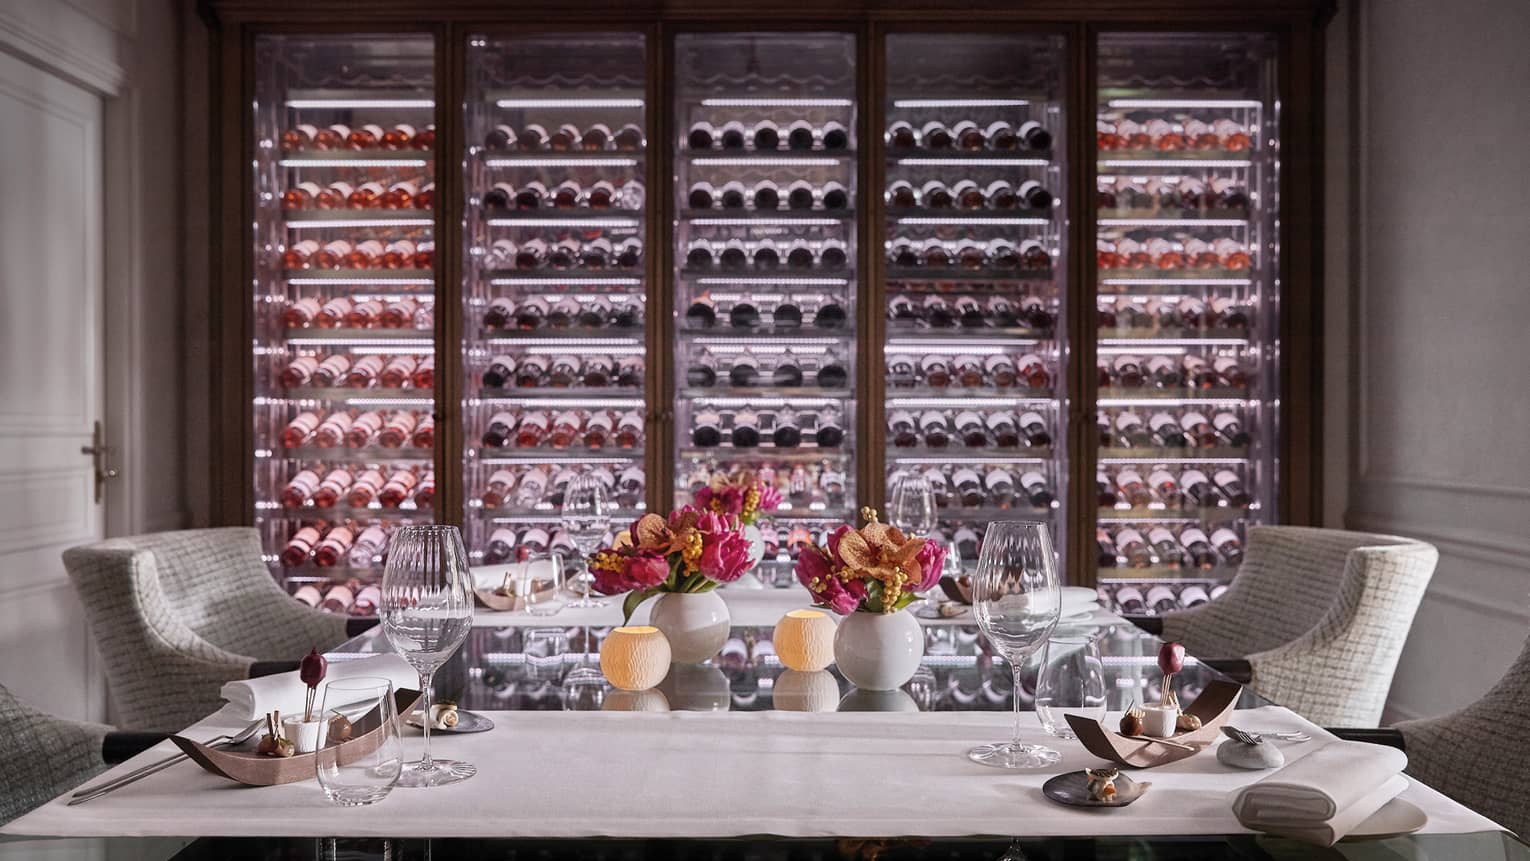 A private dining room with two chairs and an illuminated wall of wine on display